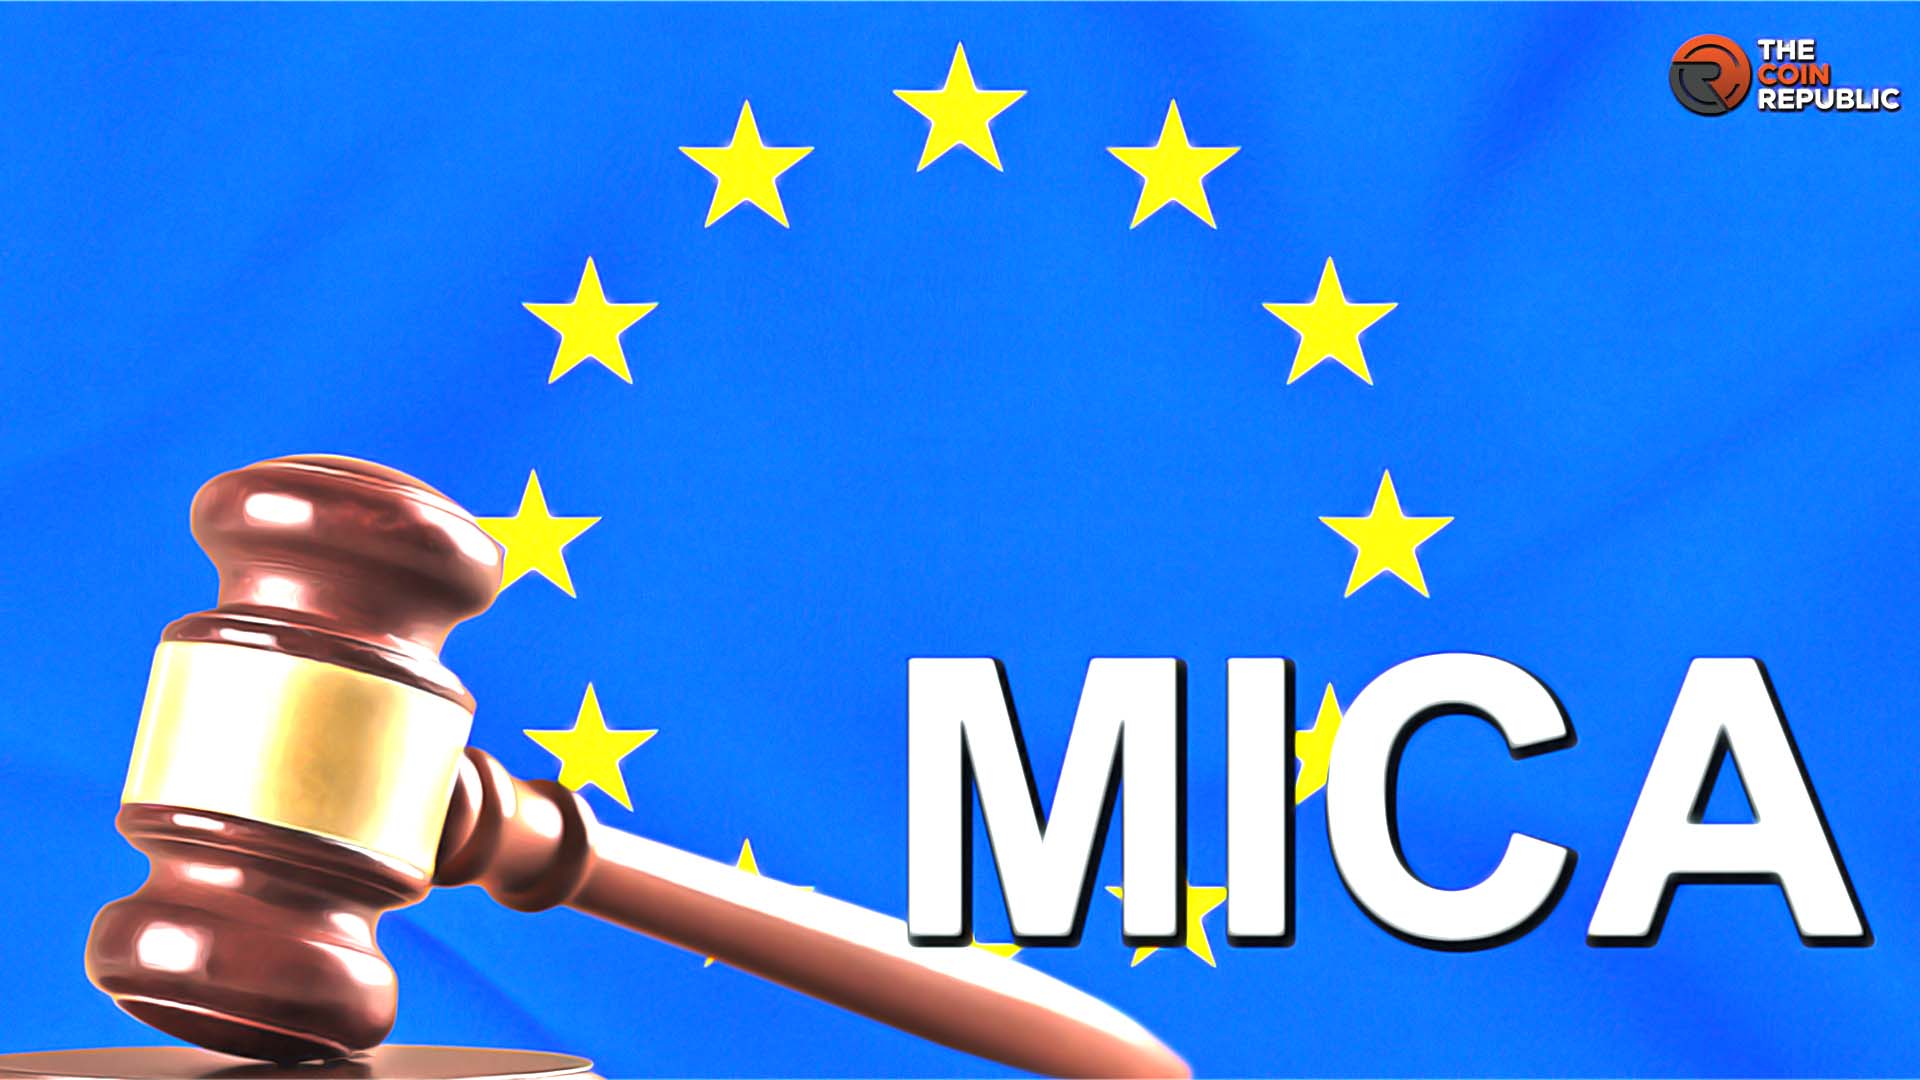 The Second Consultation On MiCA Regulation Is Finally On Board